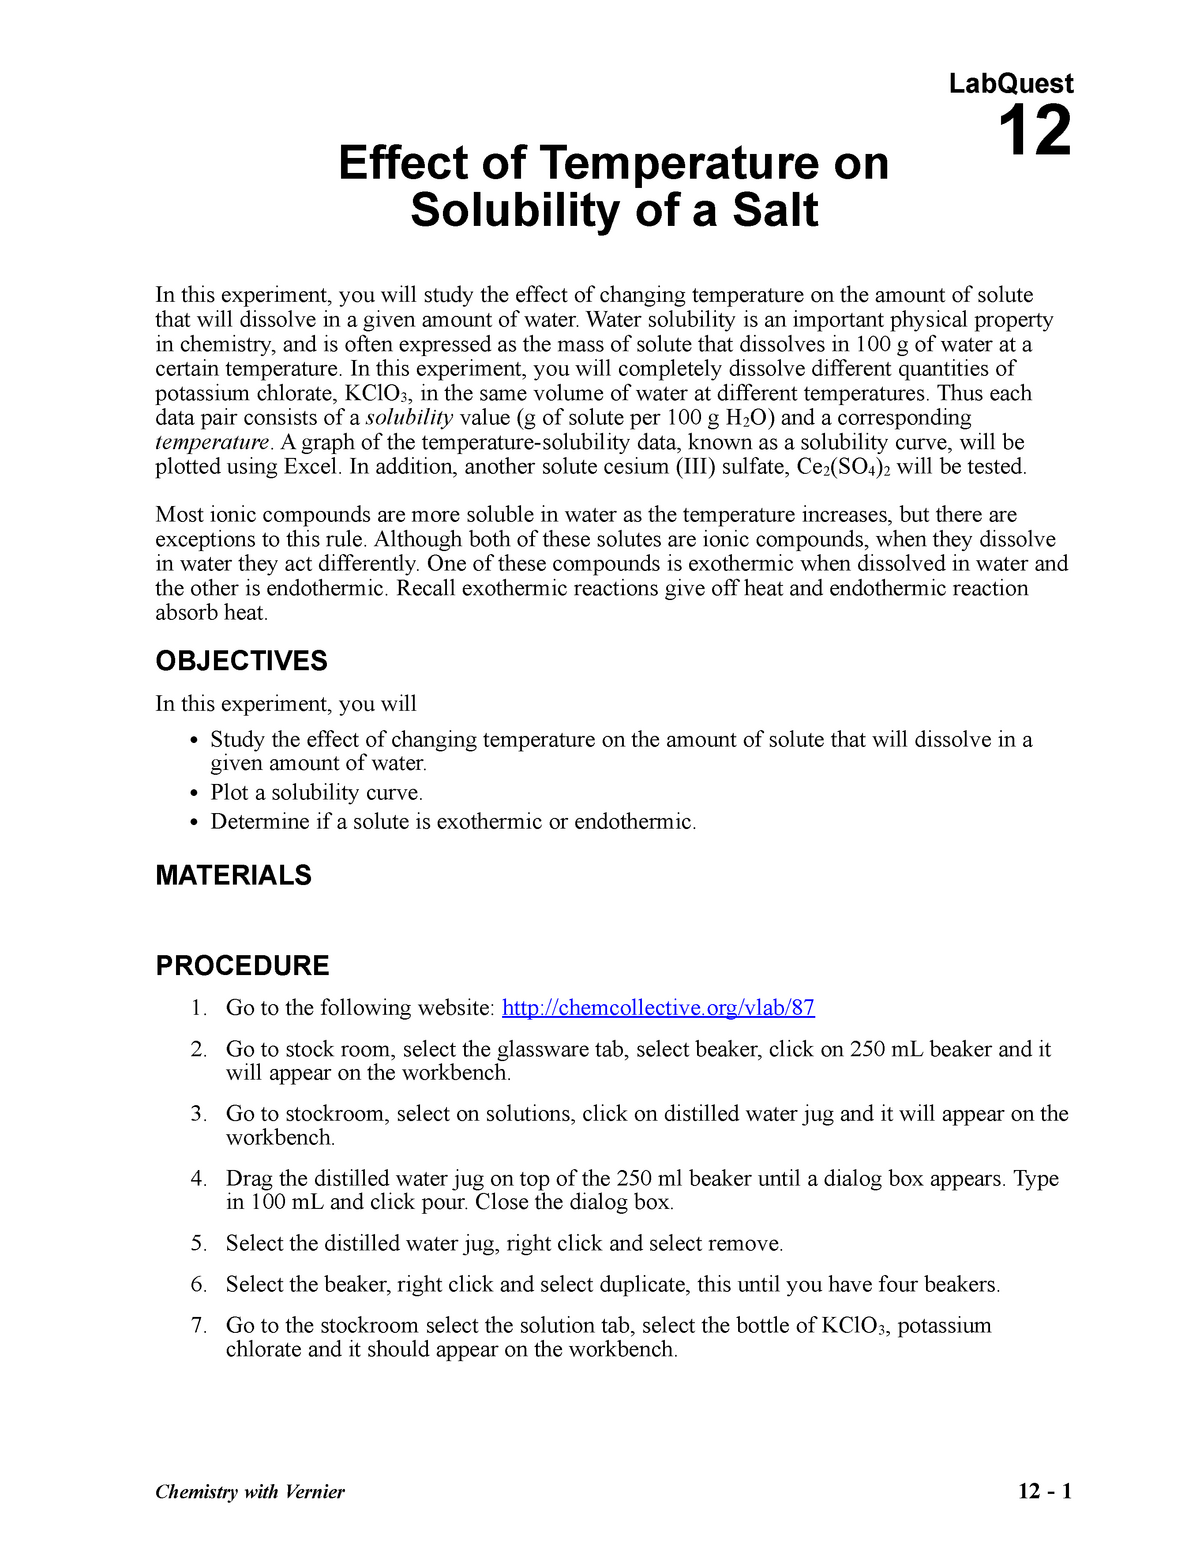 Effect Of Temperature On The Solubility Of A Salt Chem Collective Chemistry With Vernier 12 Labquest 12 Effect Of Temperature On Solubility Of Salt In This Studocu